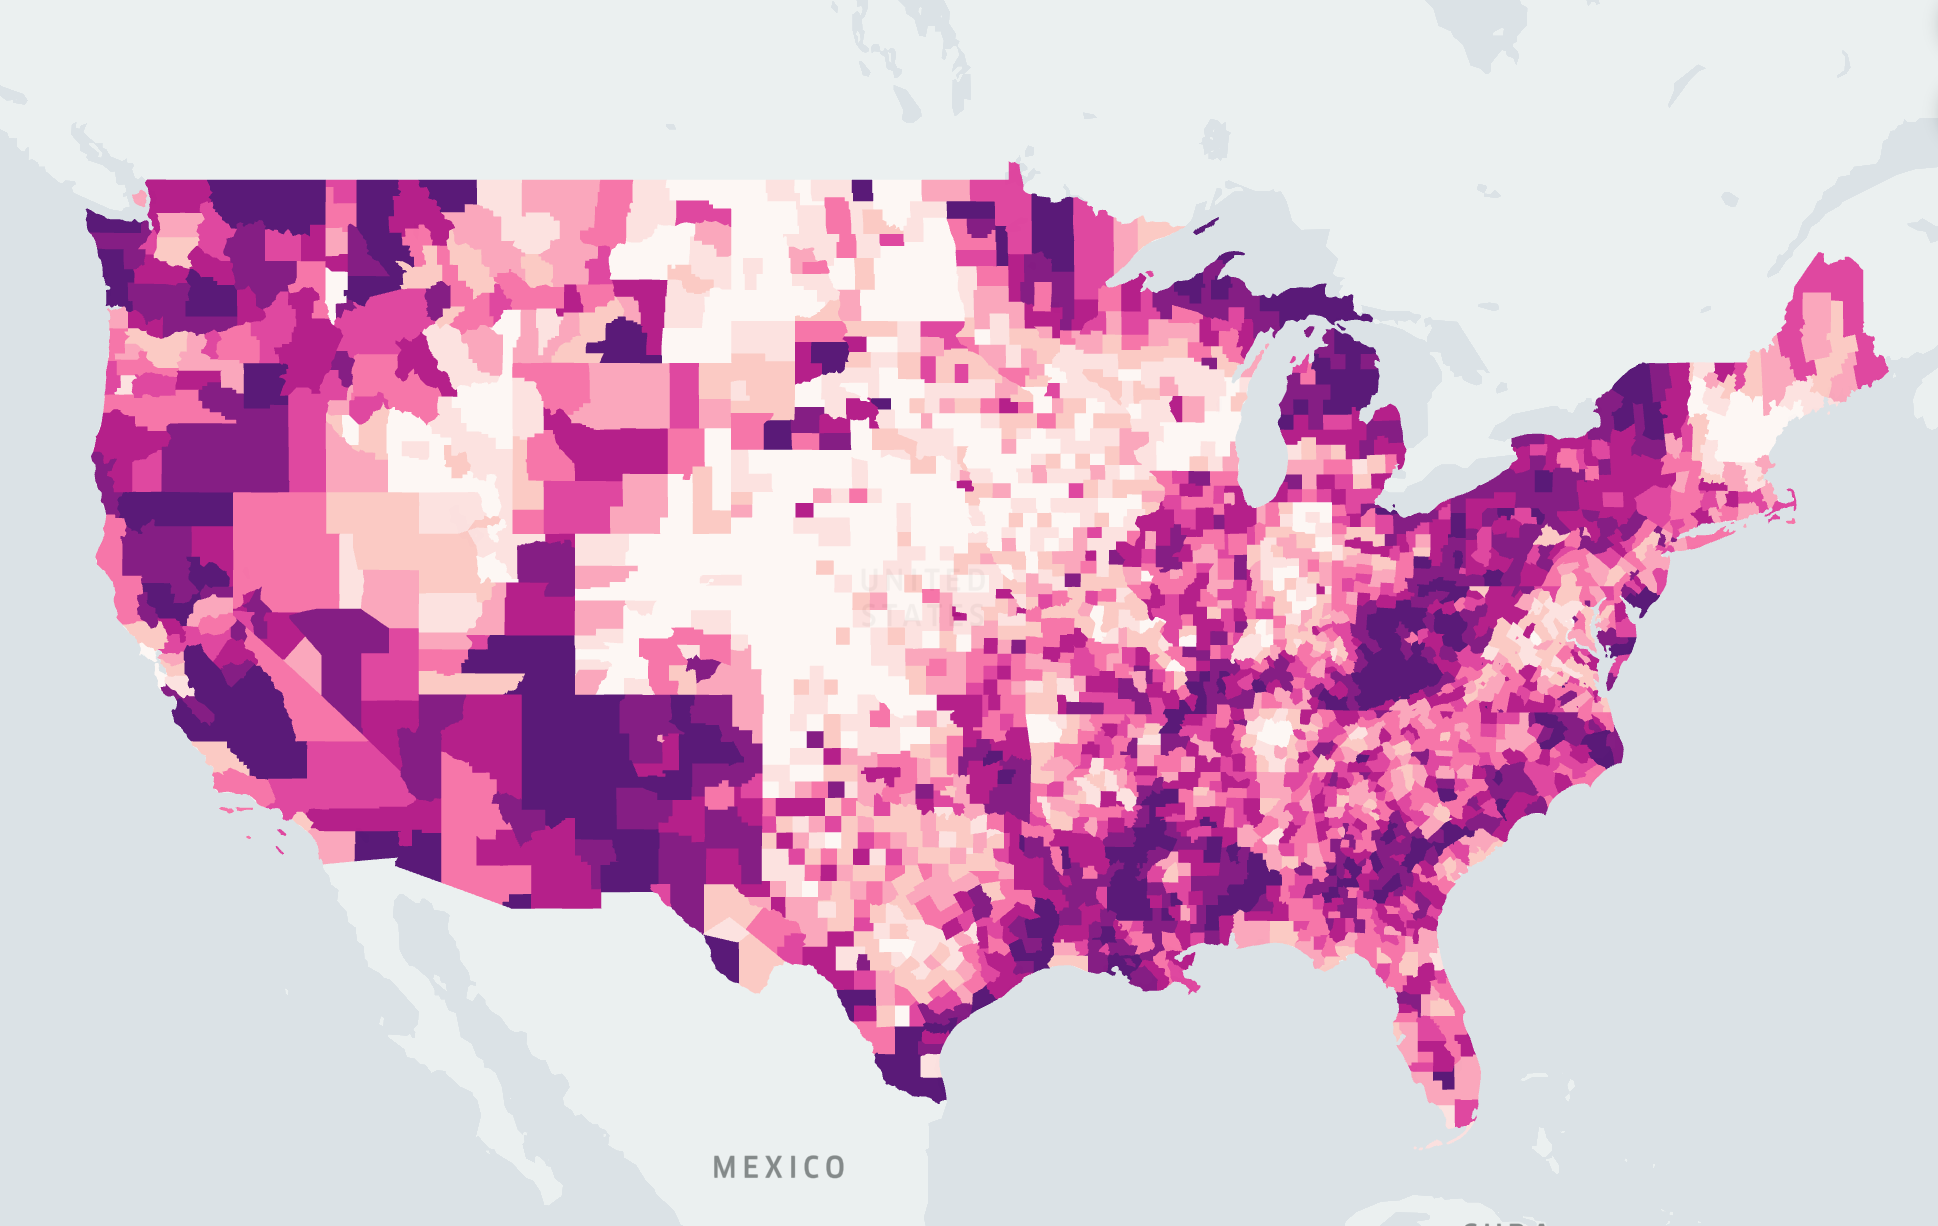 us county map shapefile Visualizing Unemployment For U S Counties With Kepler Gl By us county map shapefile